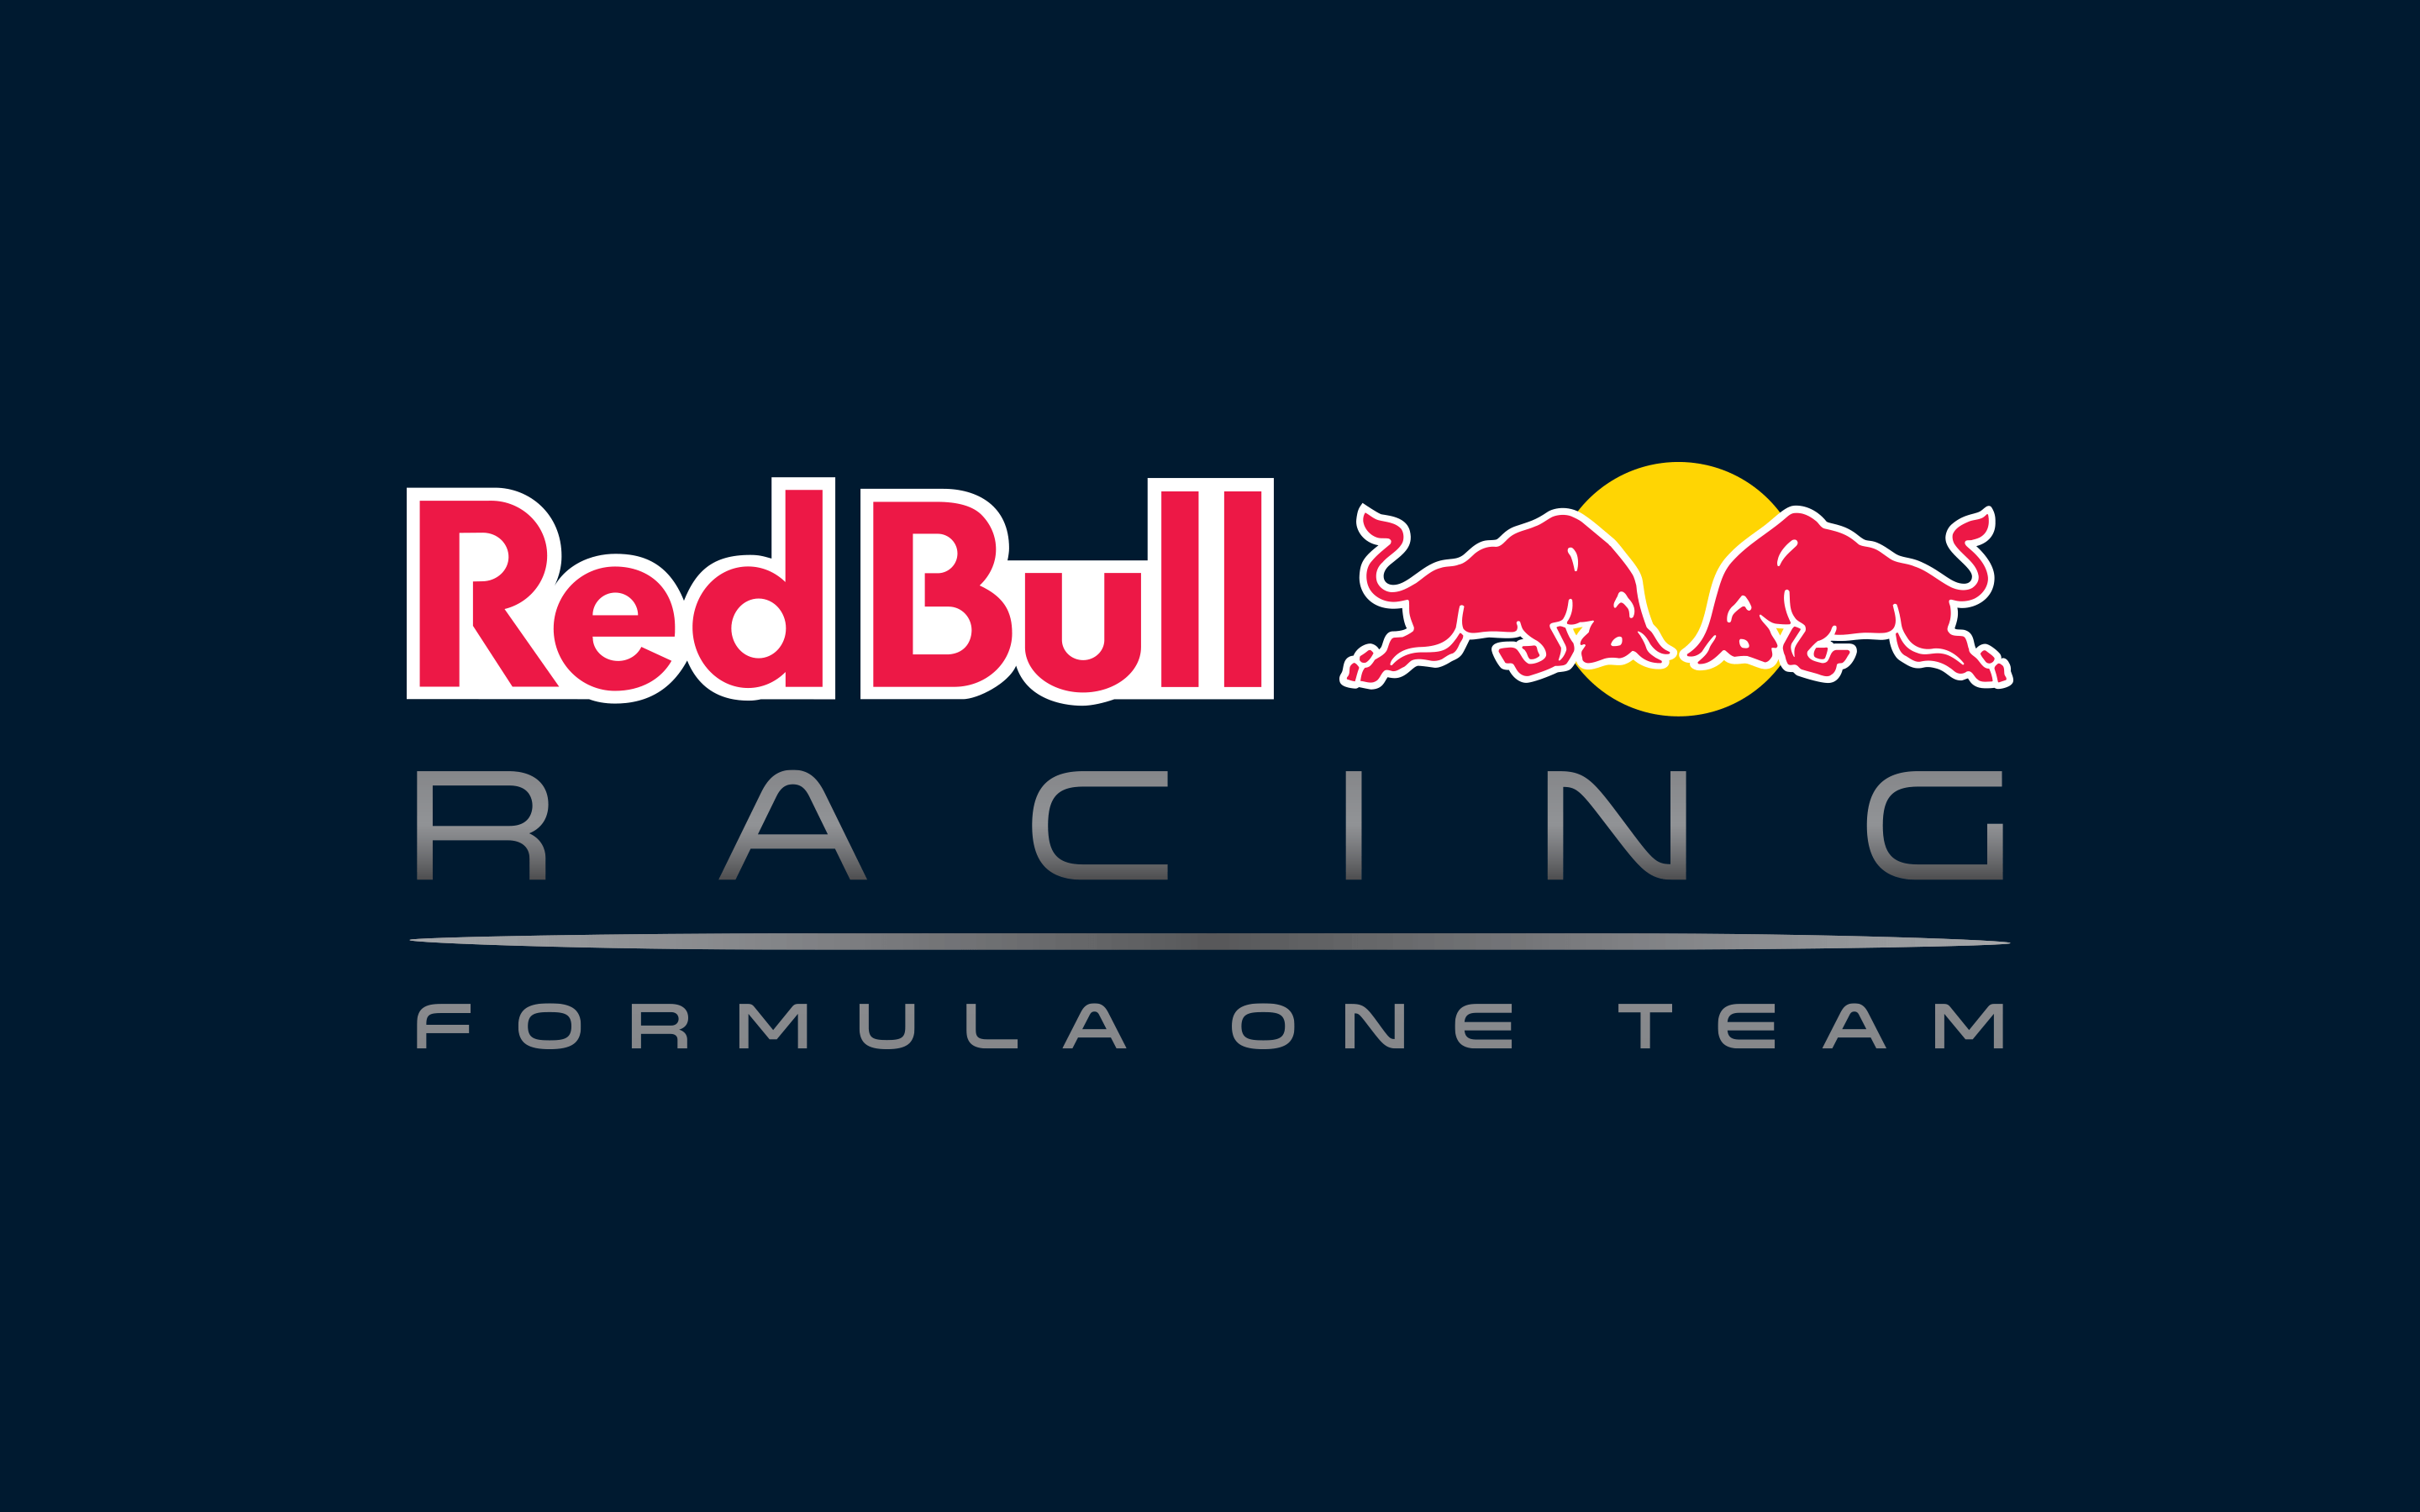 Red Bull sent me this wallpaper after I emailed them complaining